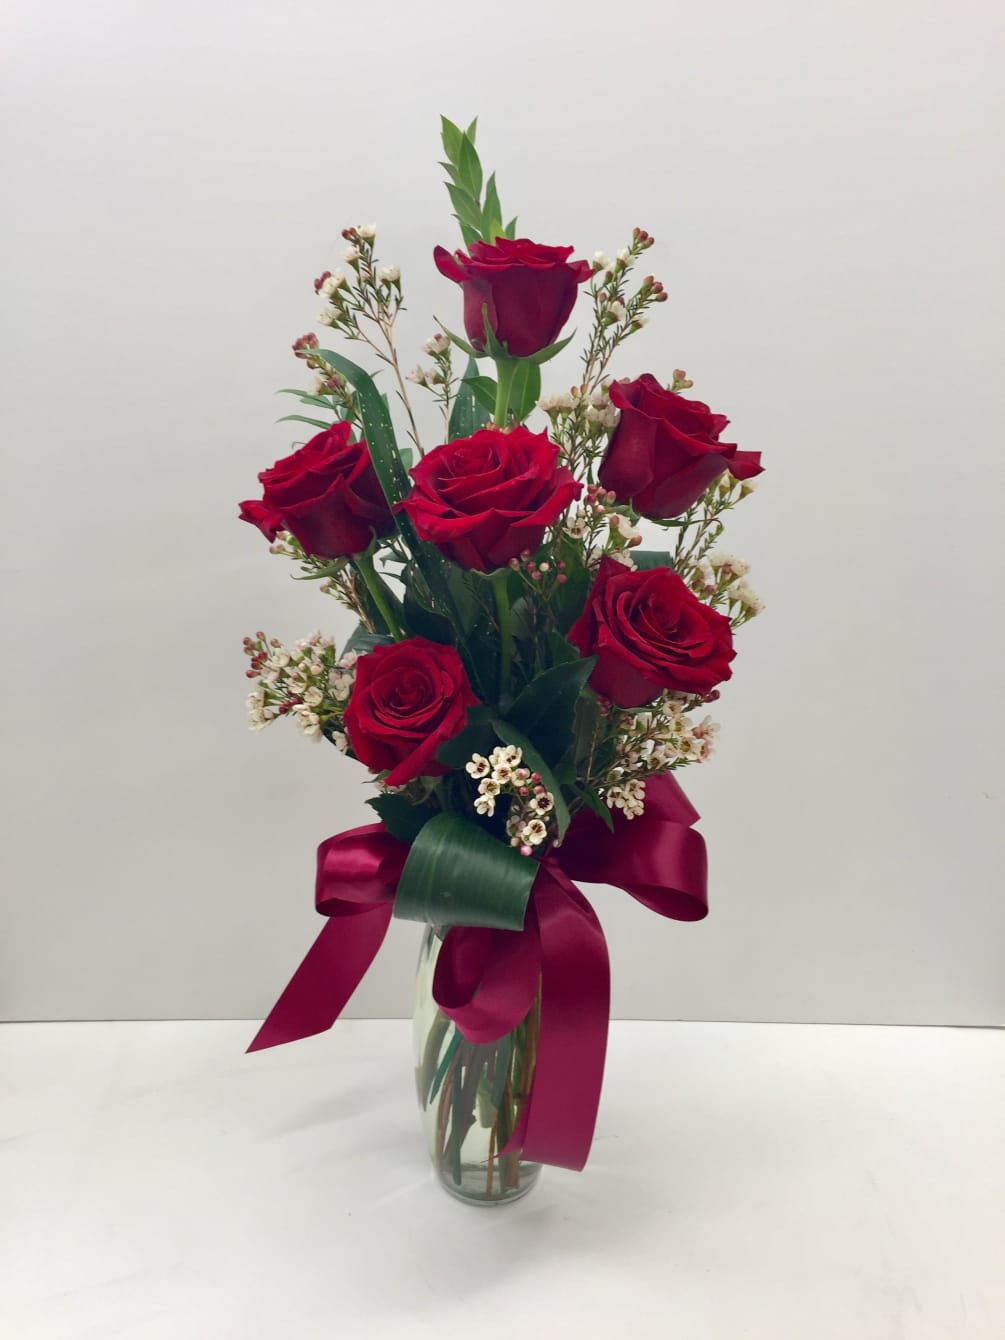 Half dozen velvet explorer roses in vase with accent flowers and foliages